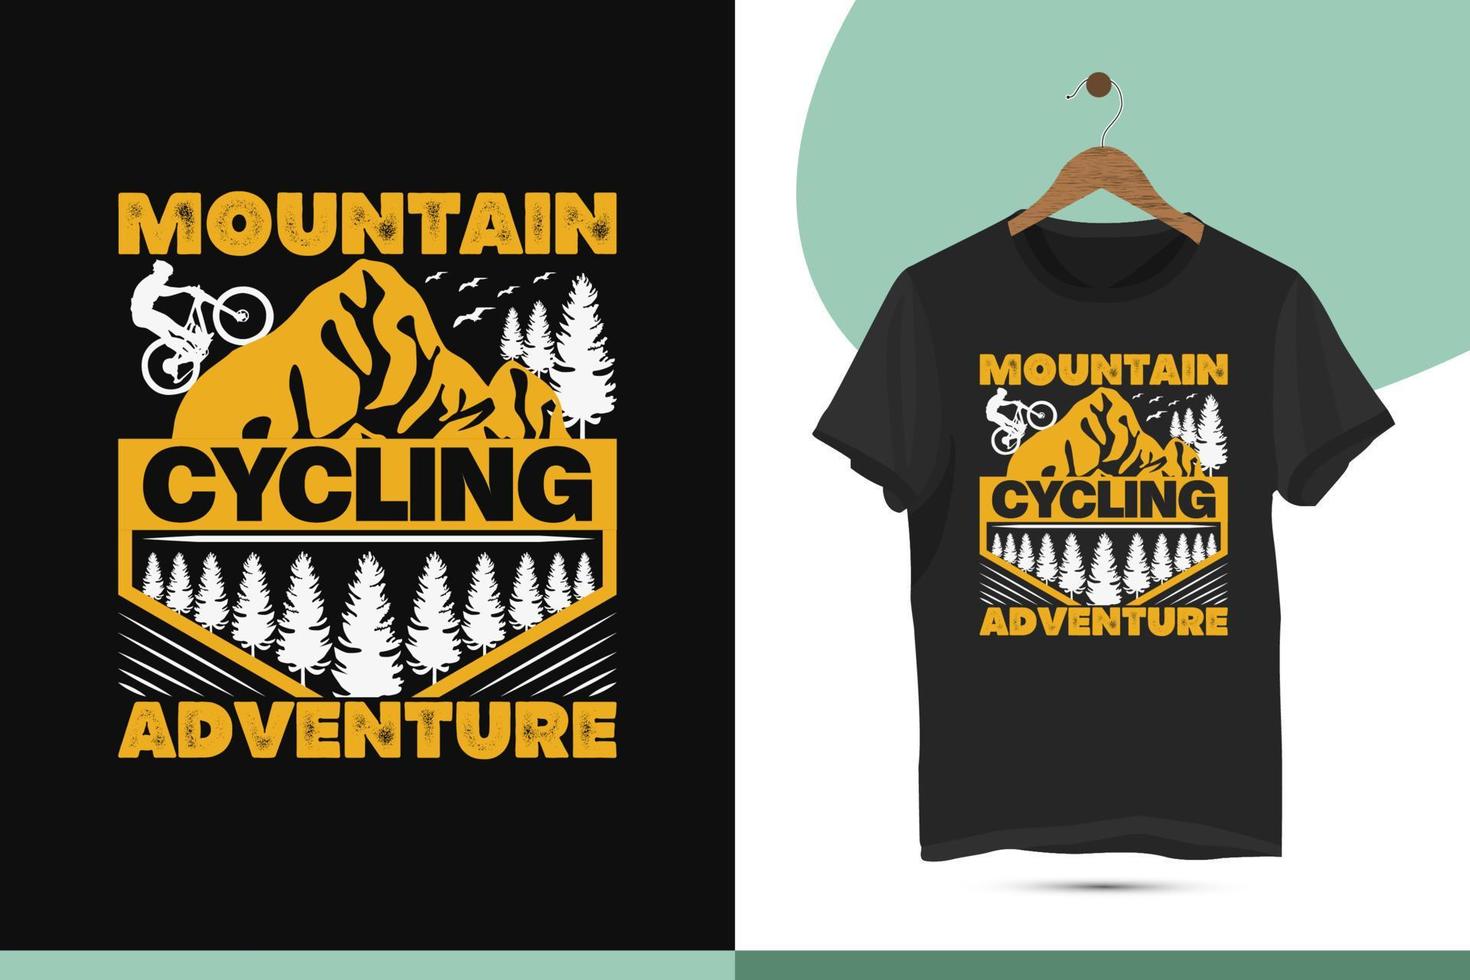 Mountain cycling adventure t-shirt design template. Vector illustration with mountain, wild, forest, and riding silhouette. Print on the shirt, bags, mugs, and pillows.